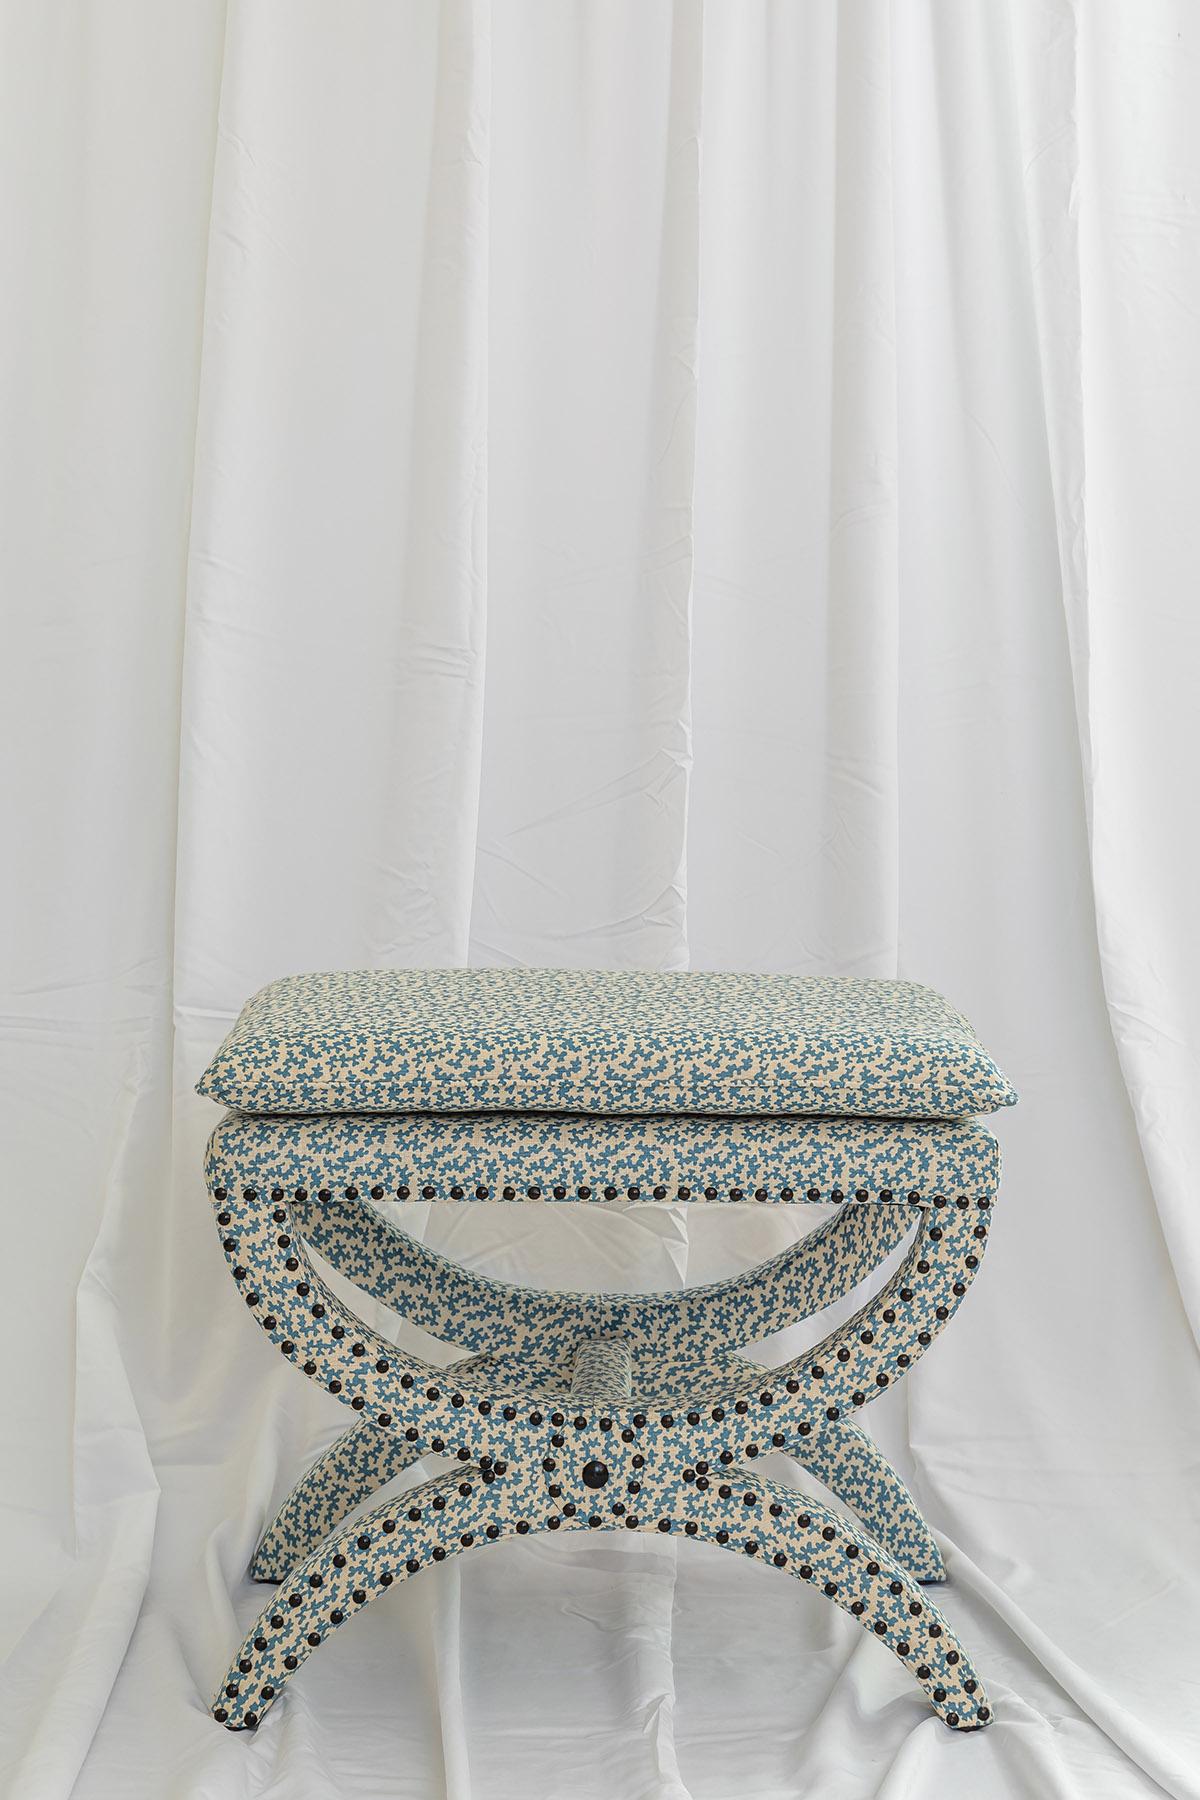 Greco Roman The Diphros & Sella Curulis inspired Carla Stool, upholstered in Seaweed Aqua For Sale